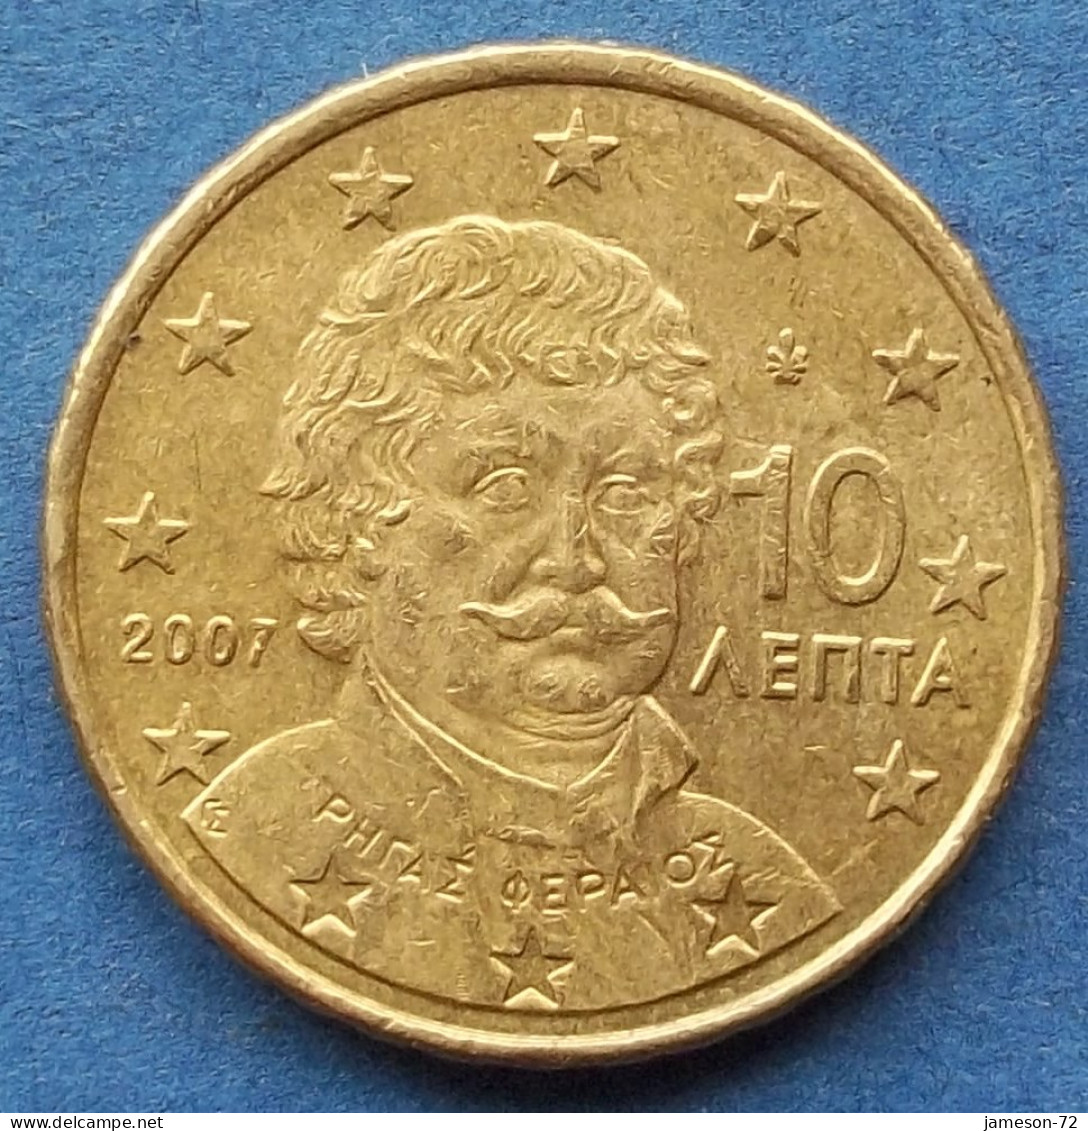 GREECE - 10 Euro Cents 2007 "Rigas Fereos" KM# 211 Euro Coinage (2002) - Edelweiss Coins - Griechenland